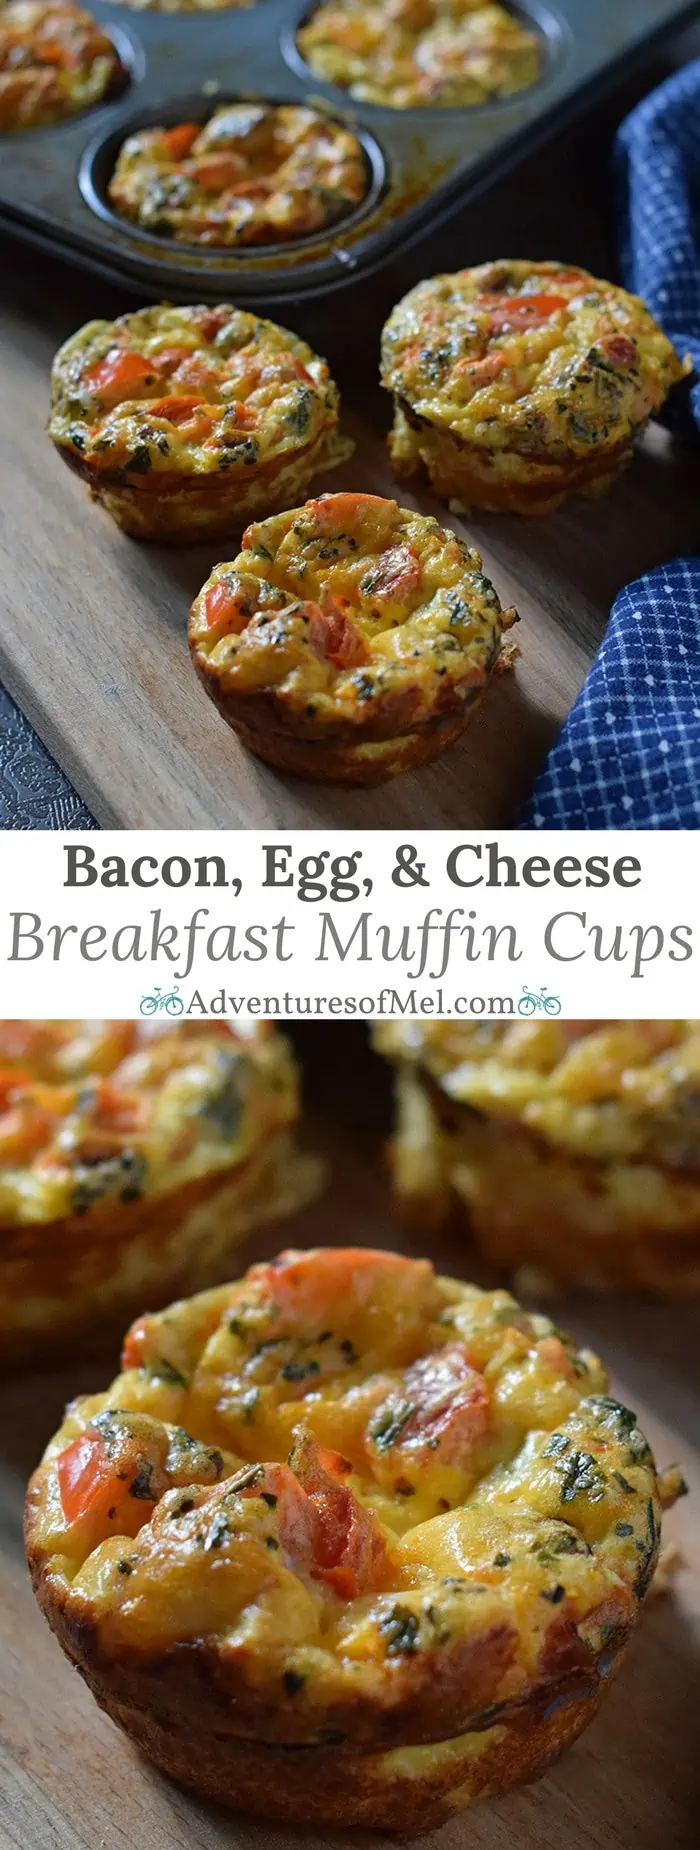 Bacon, Egg, and Cheese Breakfast Muffin Cups with eggs, bacon, cheese, peppers, tomatoes, and basil. Easy, make ahead, low carb breakfast idea!